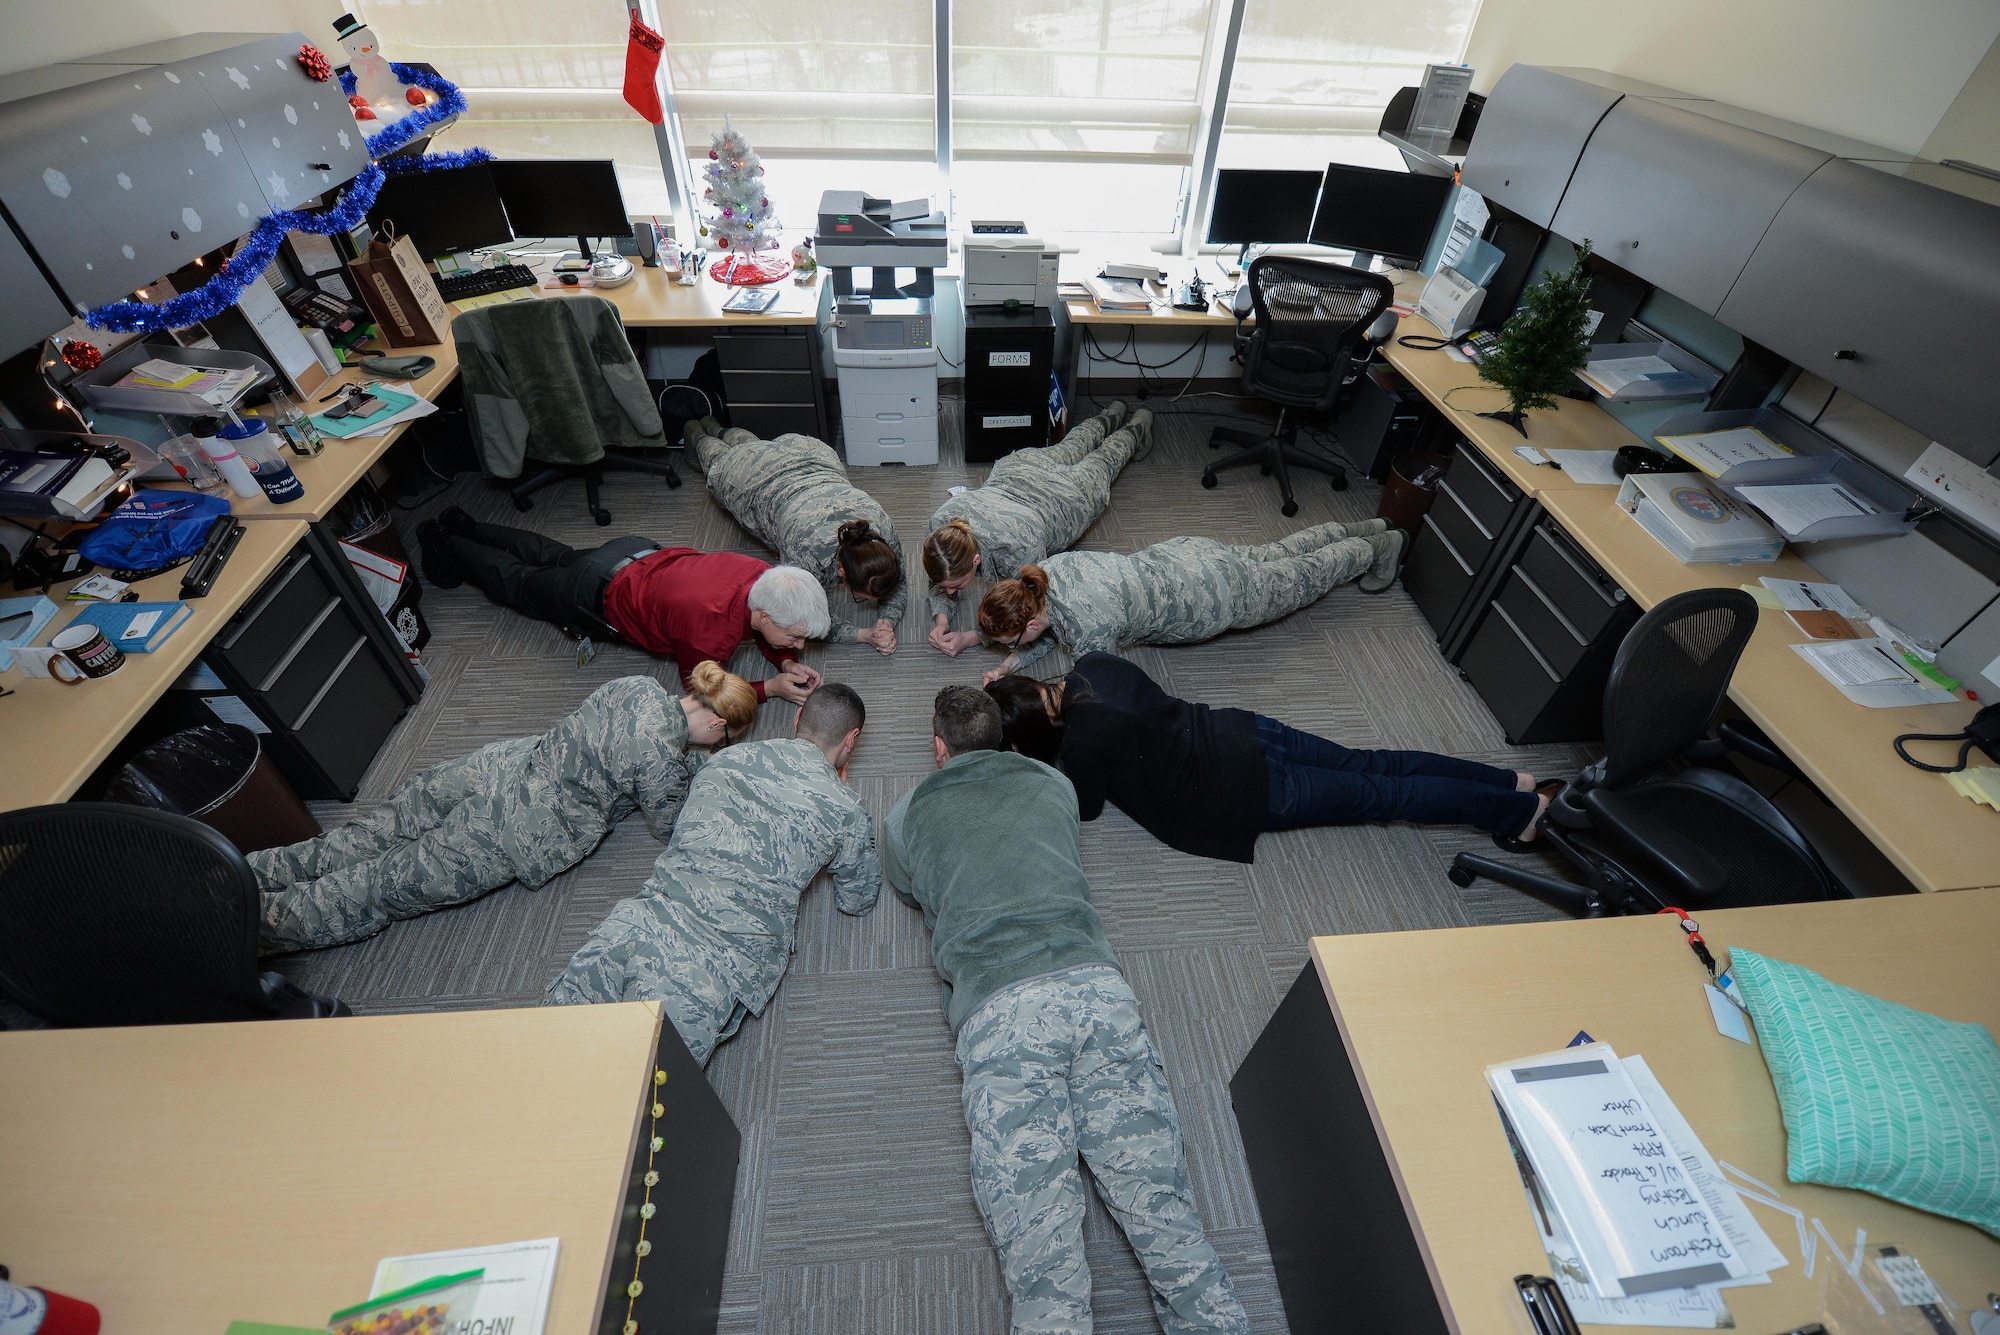 Members of the 55th Medical Group mental health section, perform planks during the work day at Offutt Air Force Base, Nebraska, Dec. 23, 2016 in the base clinic as a strategy to promote a culture of fitness in Airmen’s daily lives. Members perform small exercises throughout the day instead of one intense workout to keep the body more active and healthy. (U.S. Air Force photo by Zachary Hada)